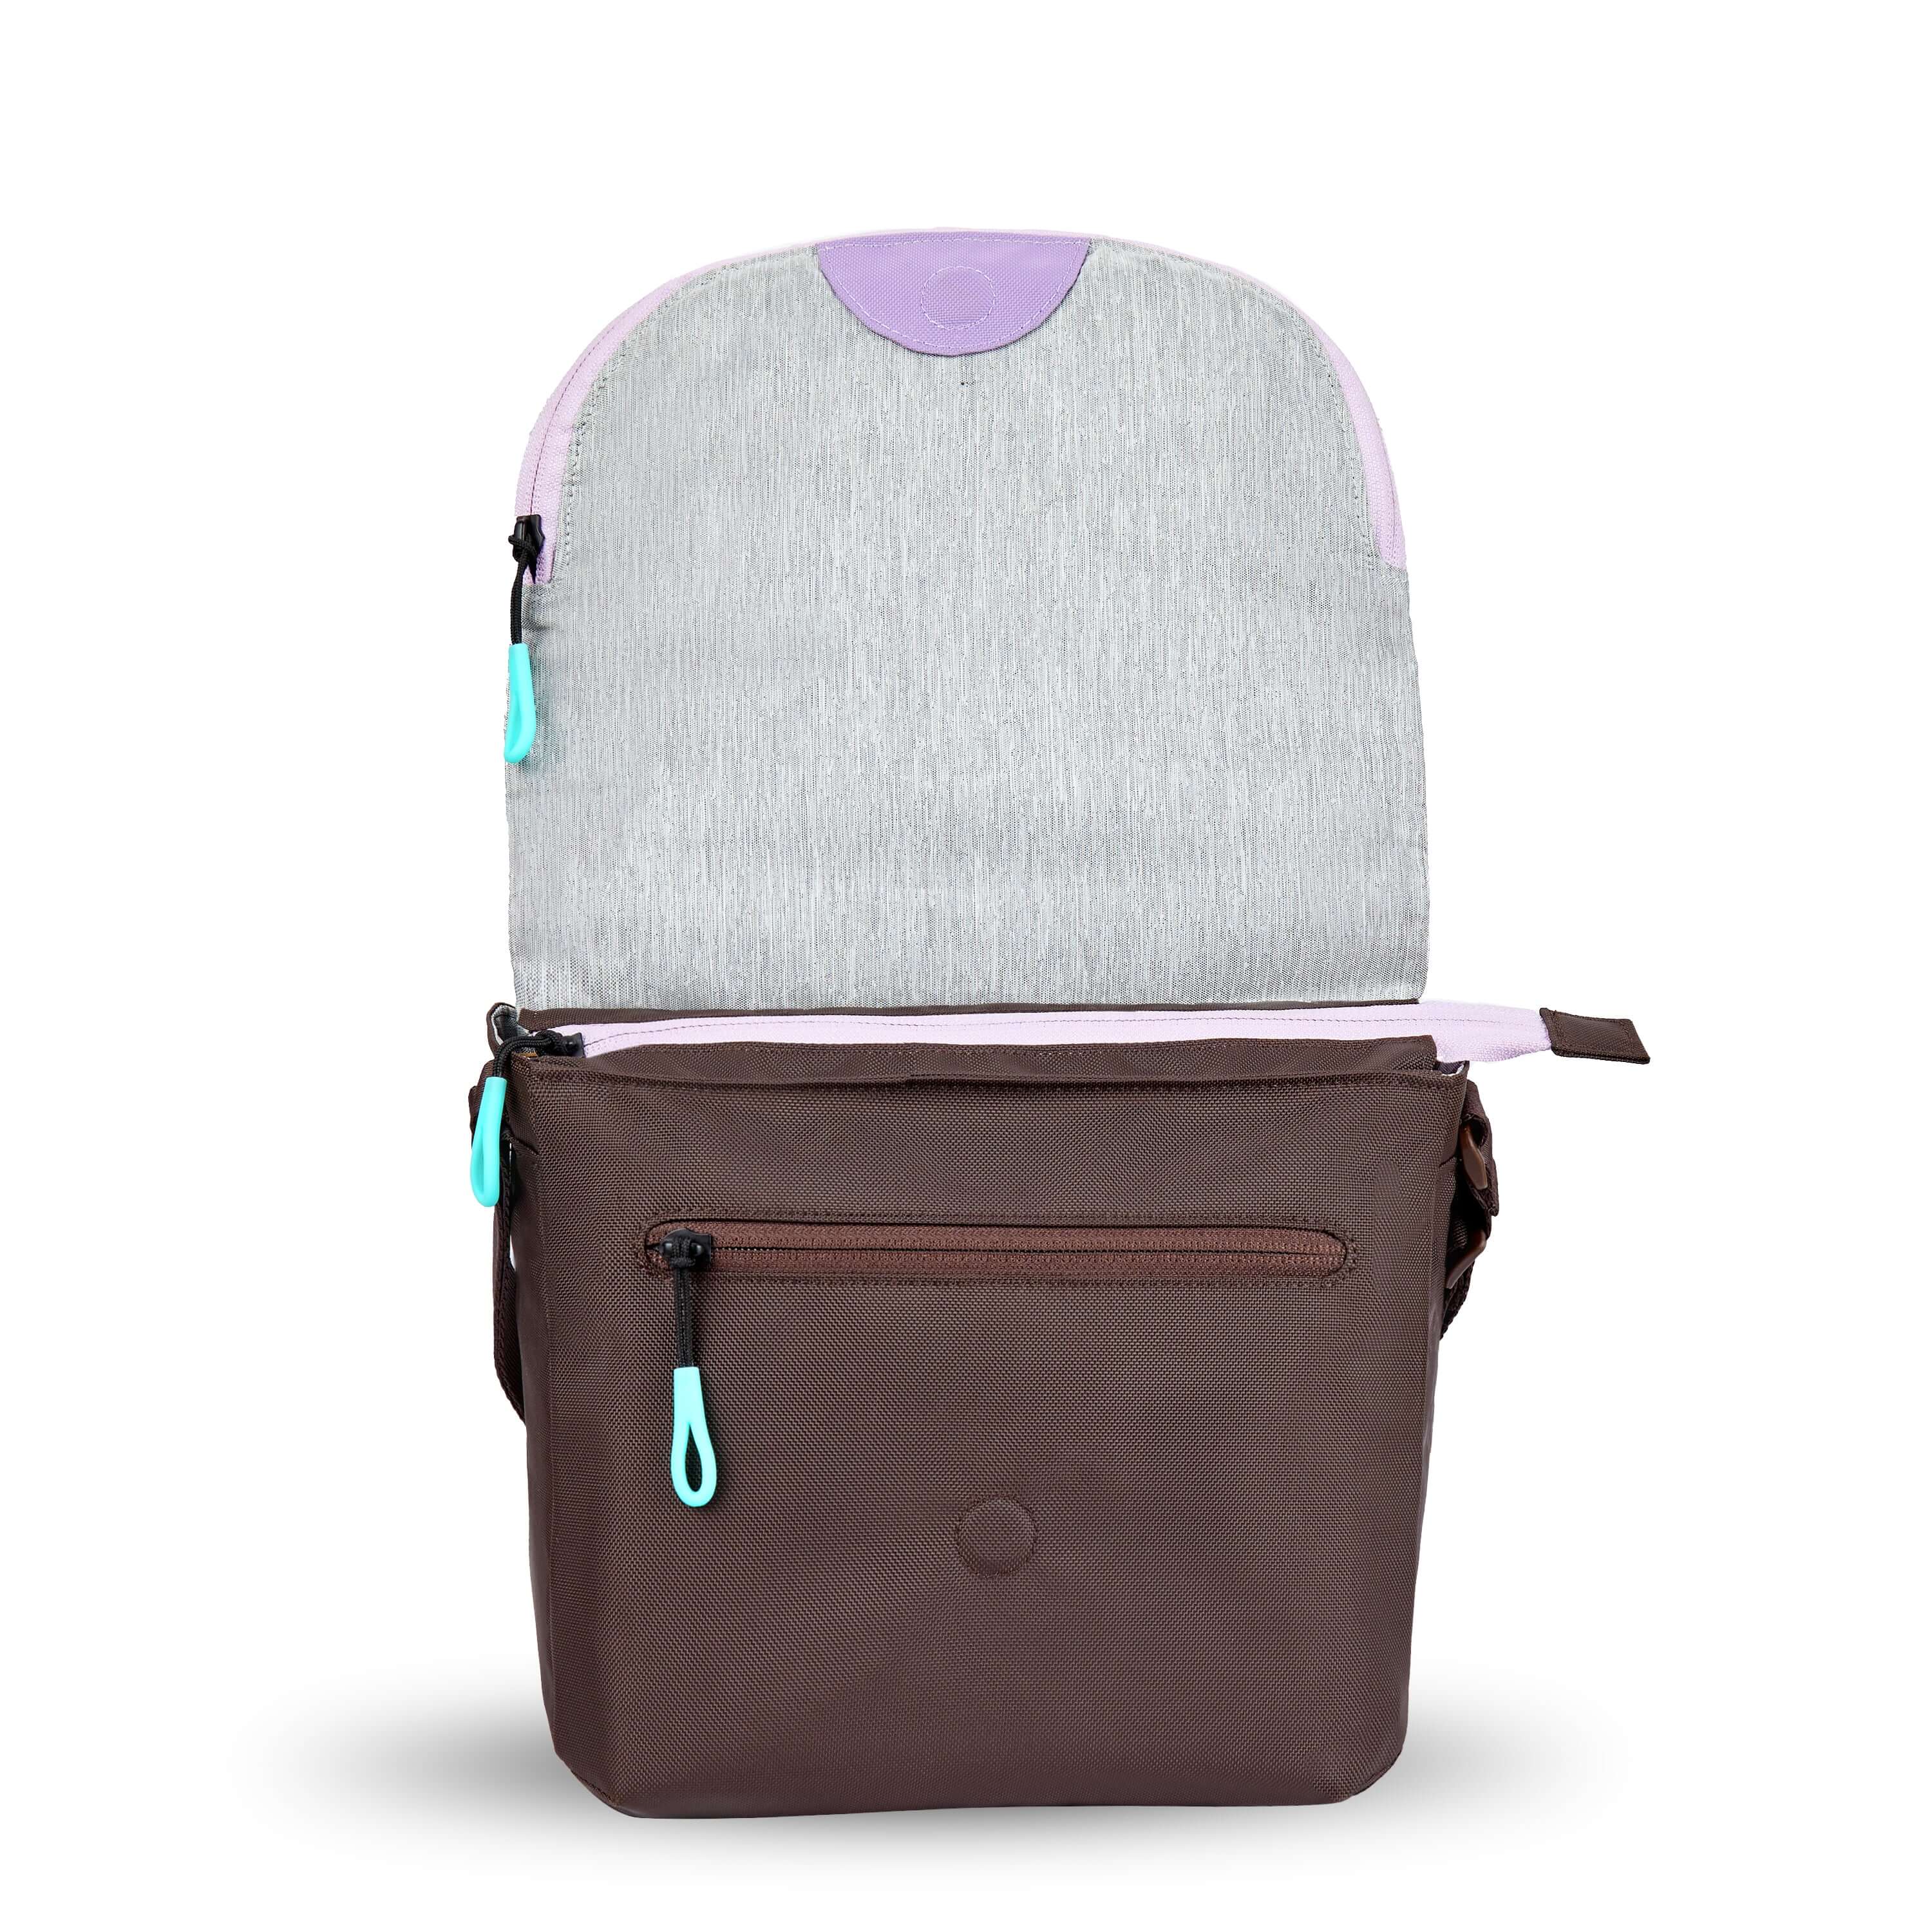 Front view of Sherpani crossbody, the Milli in Lavender. The layover flap is standing tall to reveal an external zipper pocket and a small magnet that holds the flap down.